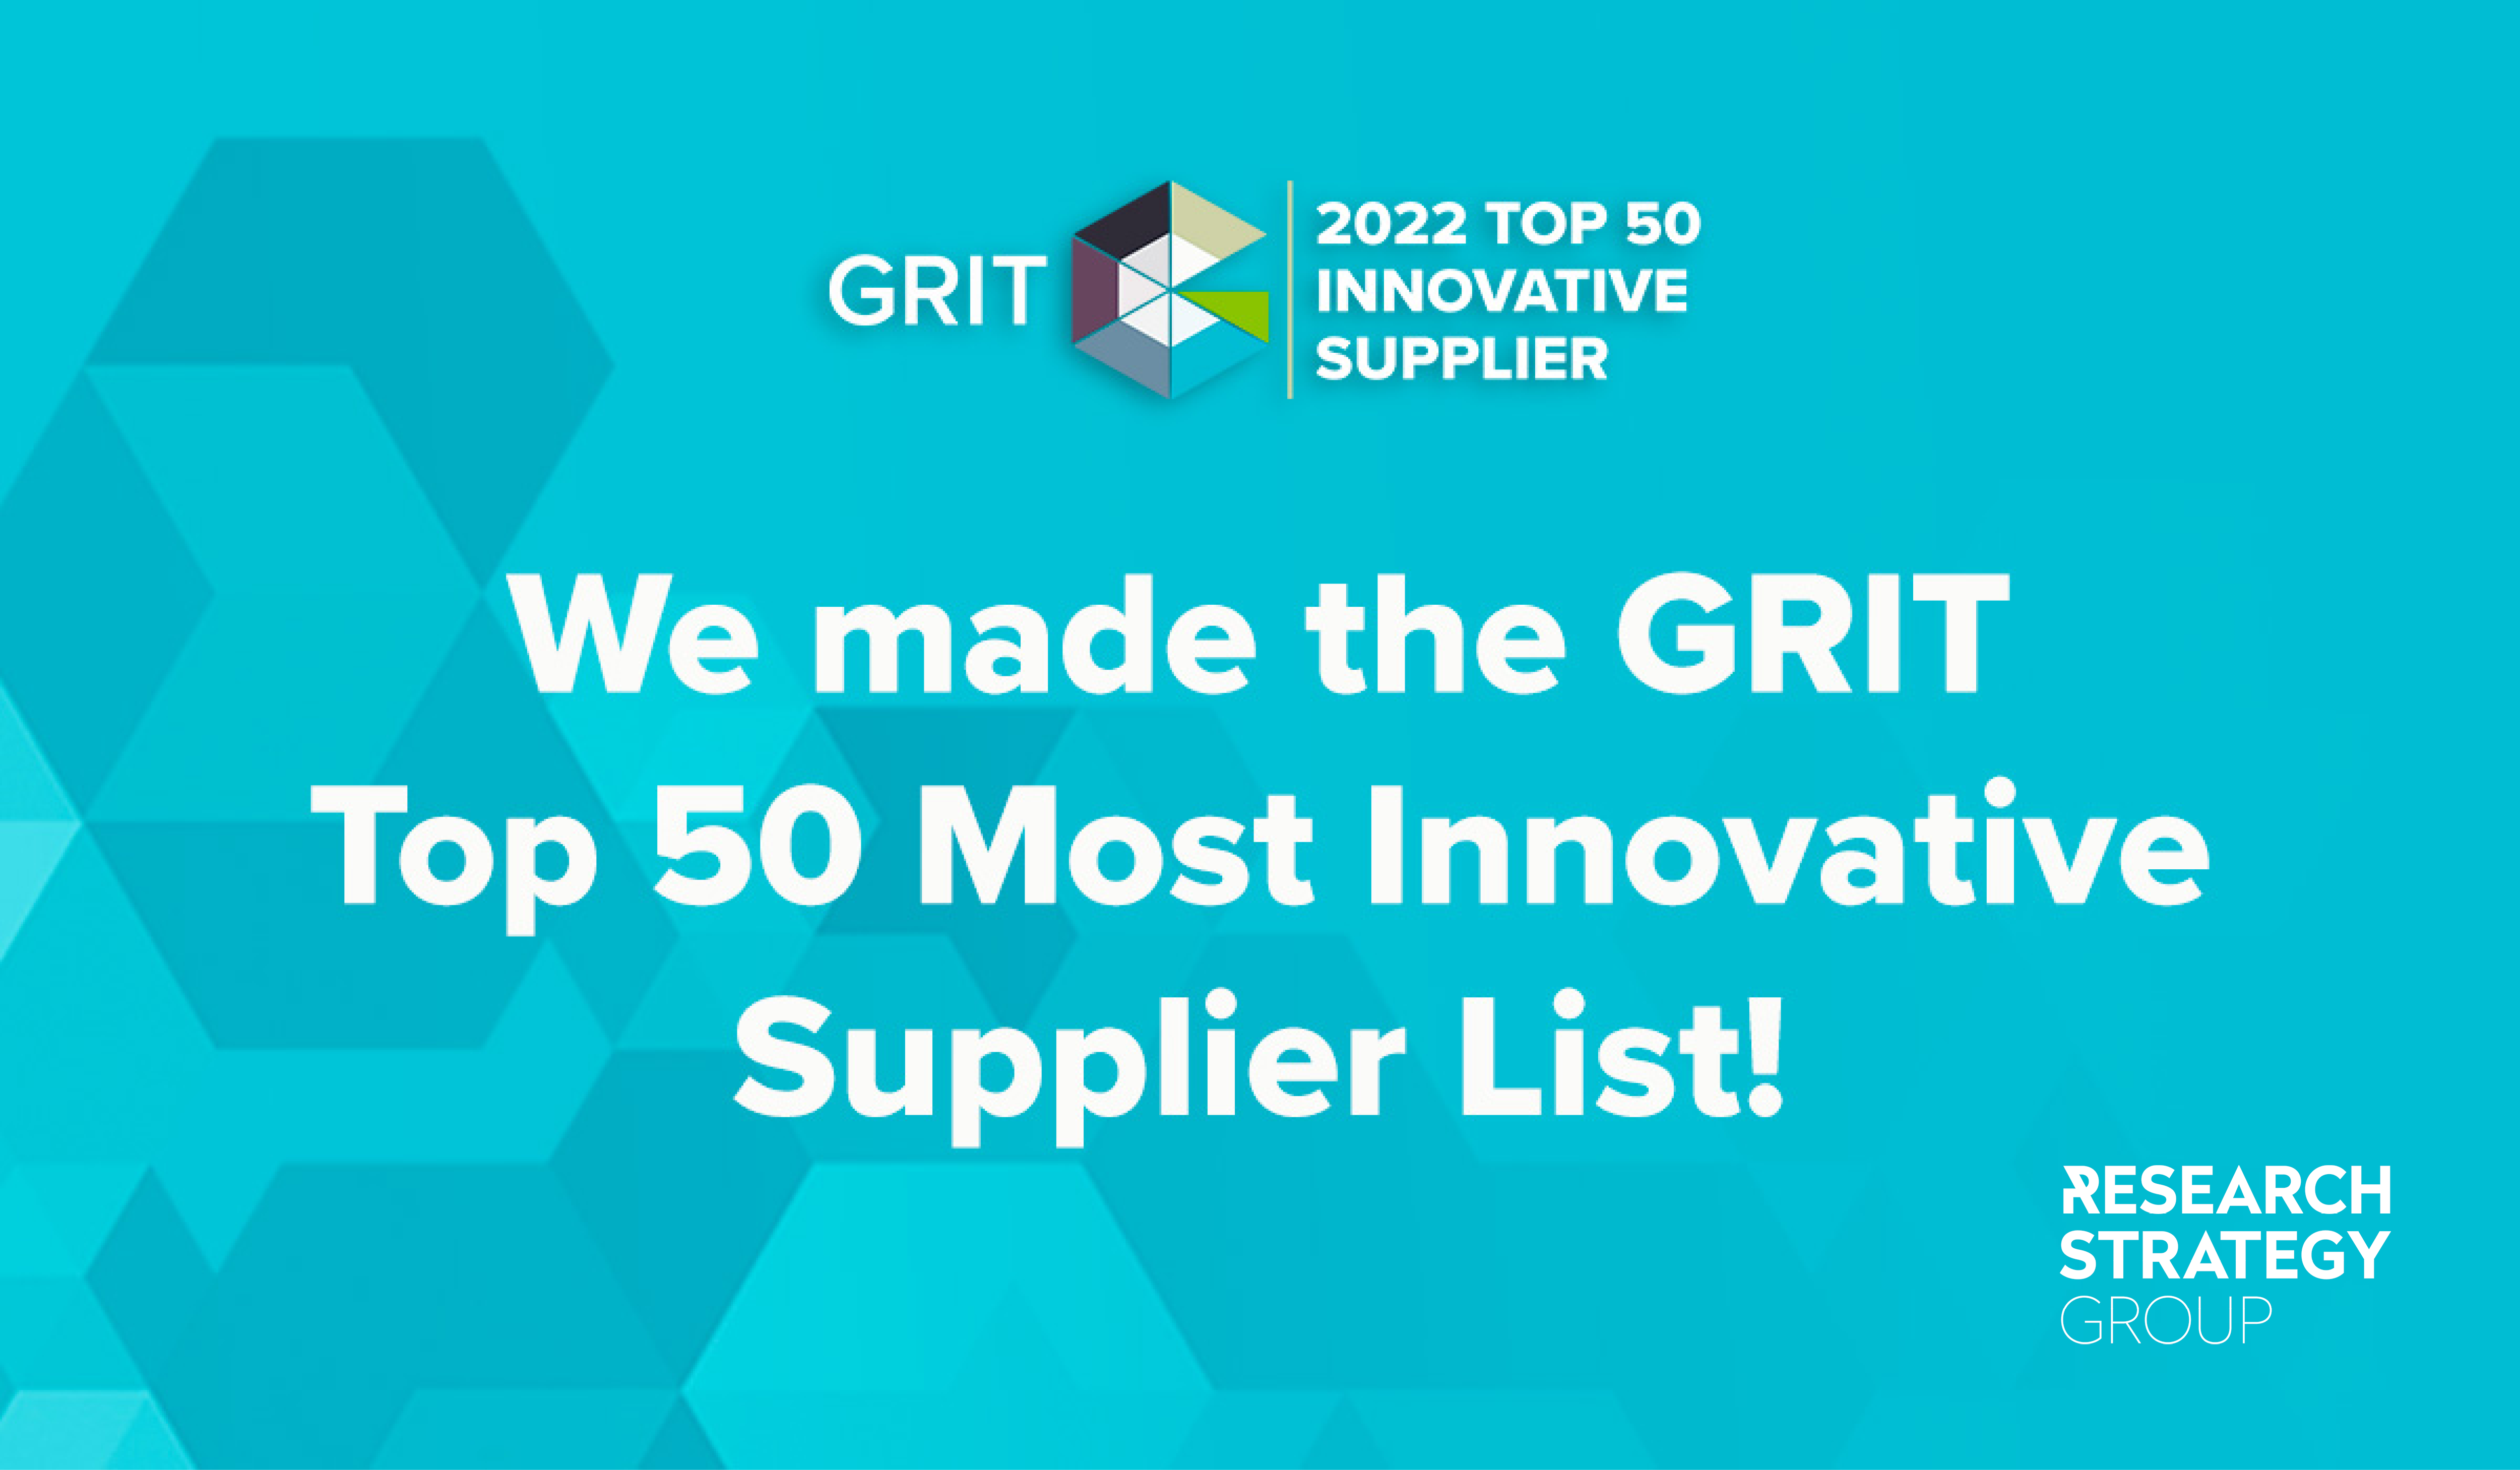 GreenBook GRIT logo with text "We made the GRIT Top 50 Most Innovative Supplier List!"